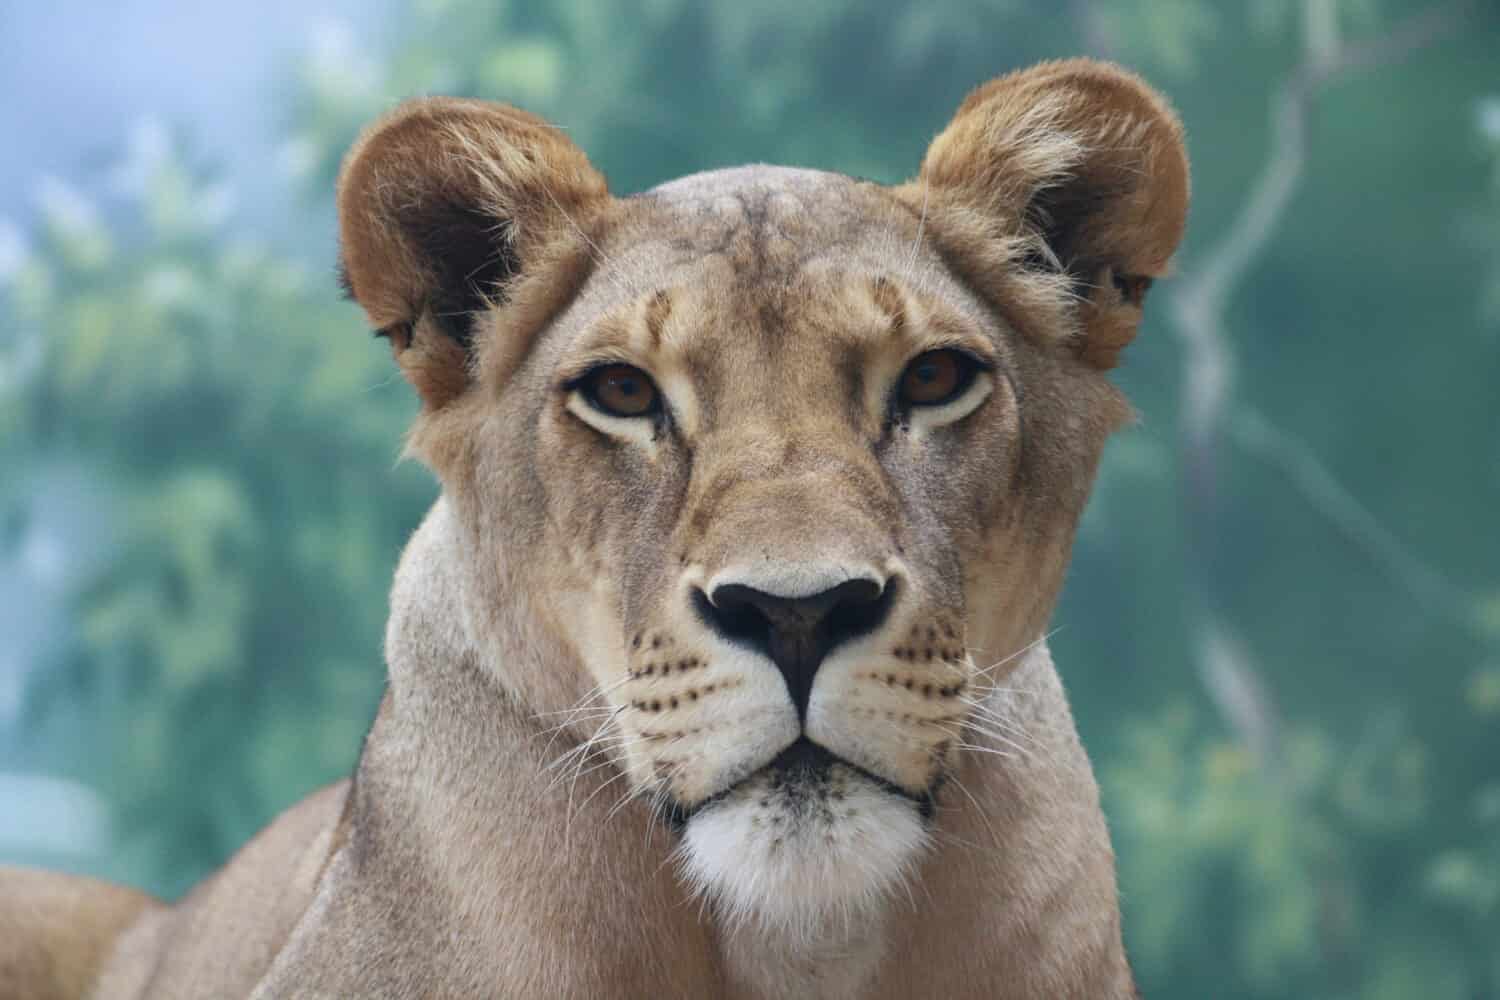 The lioness at the zoo is looking at something. 